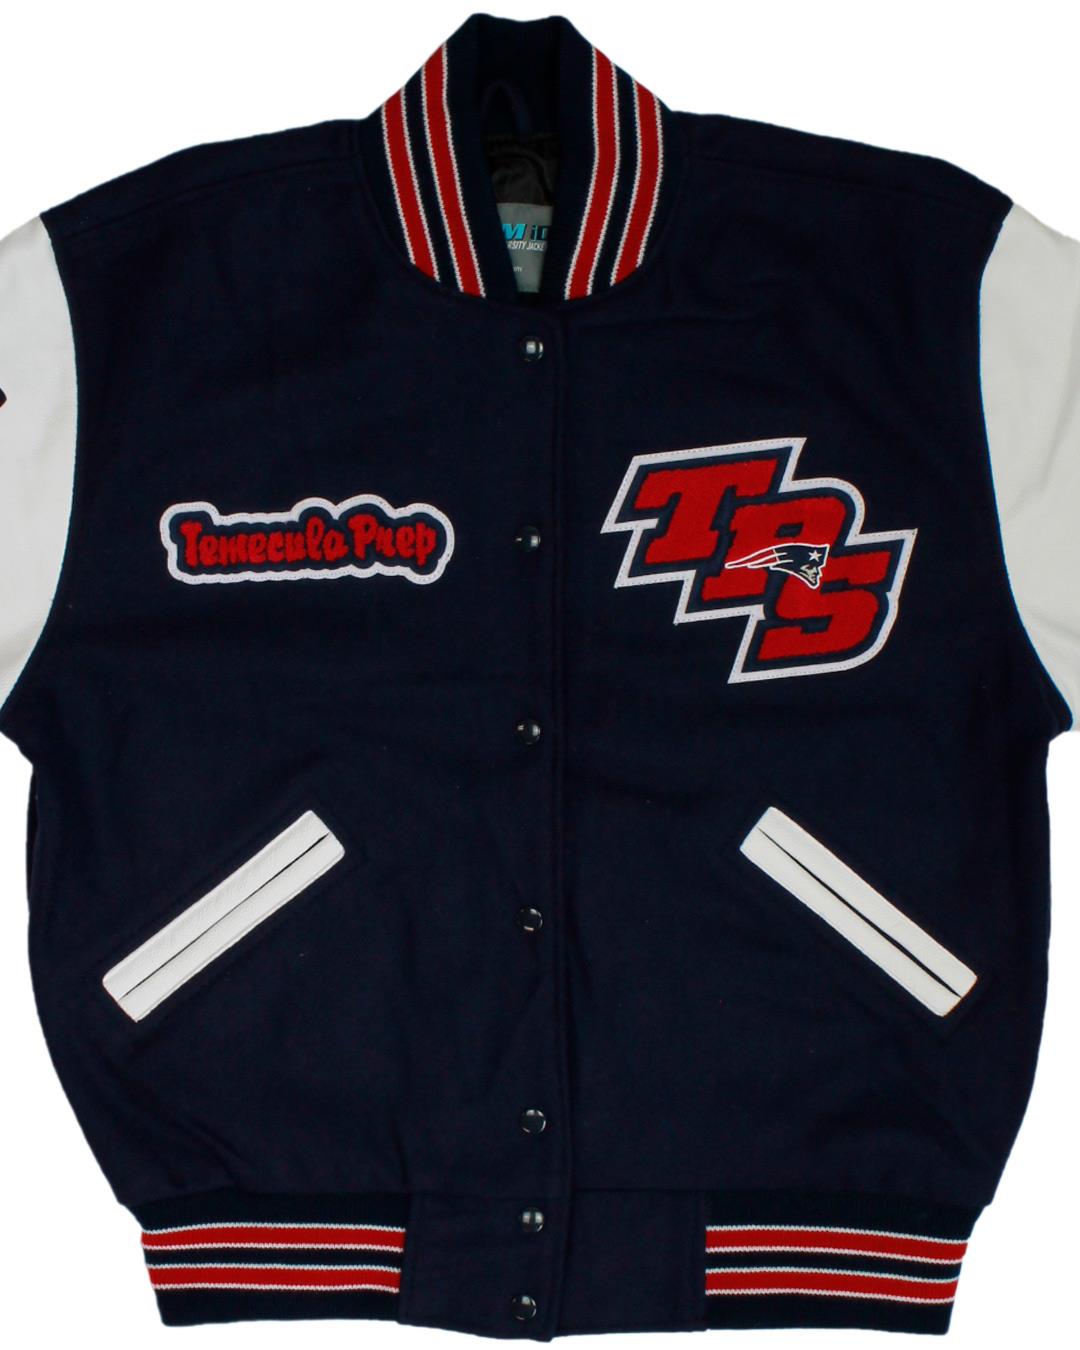 Temecula Prep Patriots Letter Jacket, Winchester CA  - Front